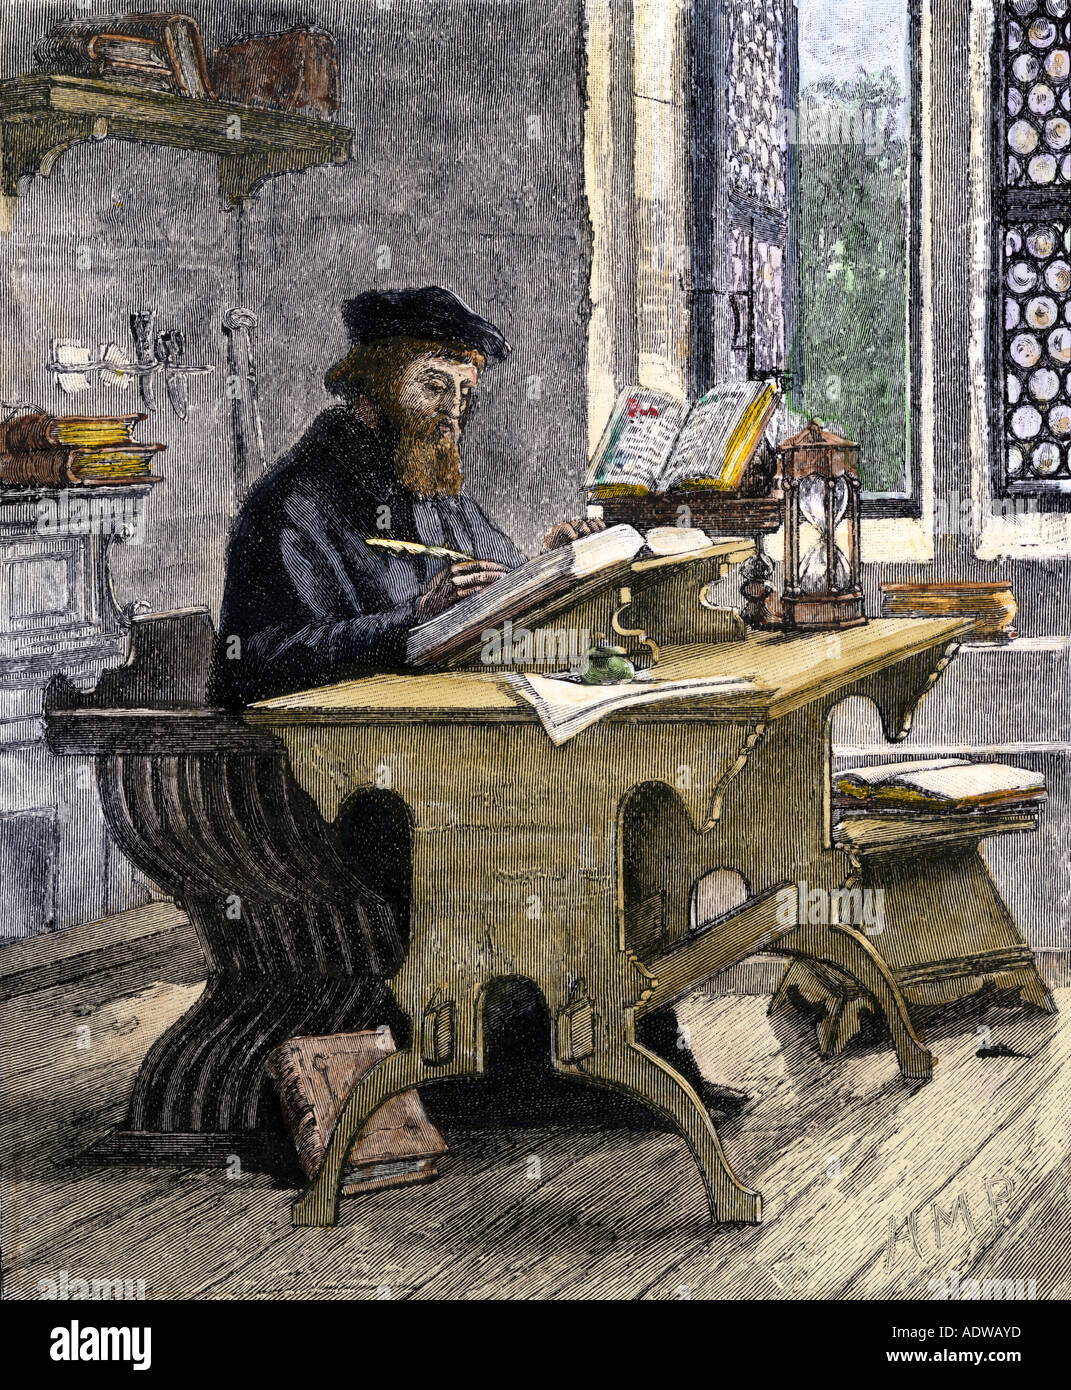 John Wycliffe translating the Bible into English 1300s. Hand-colored woodcut Stock Photo